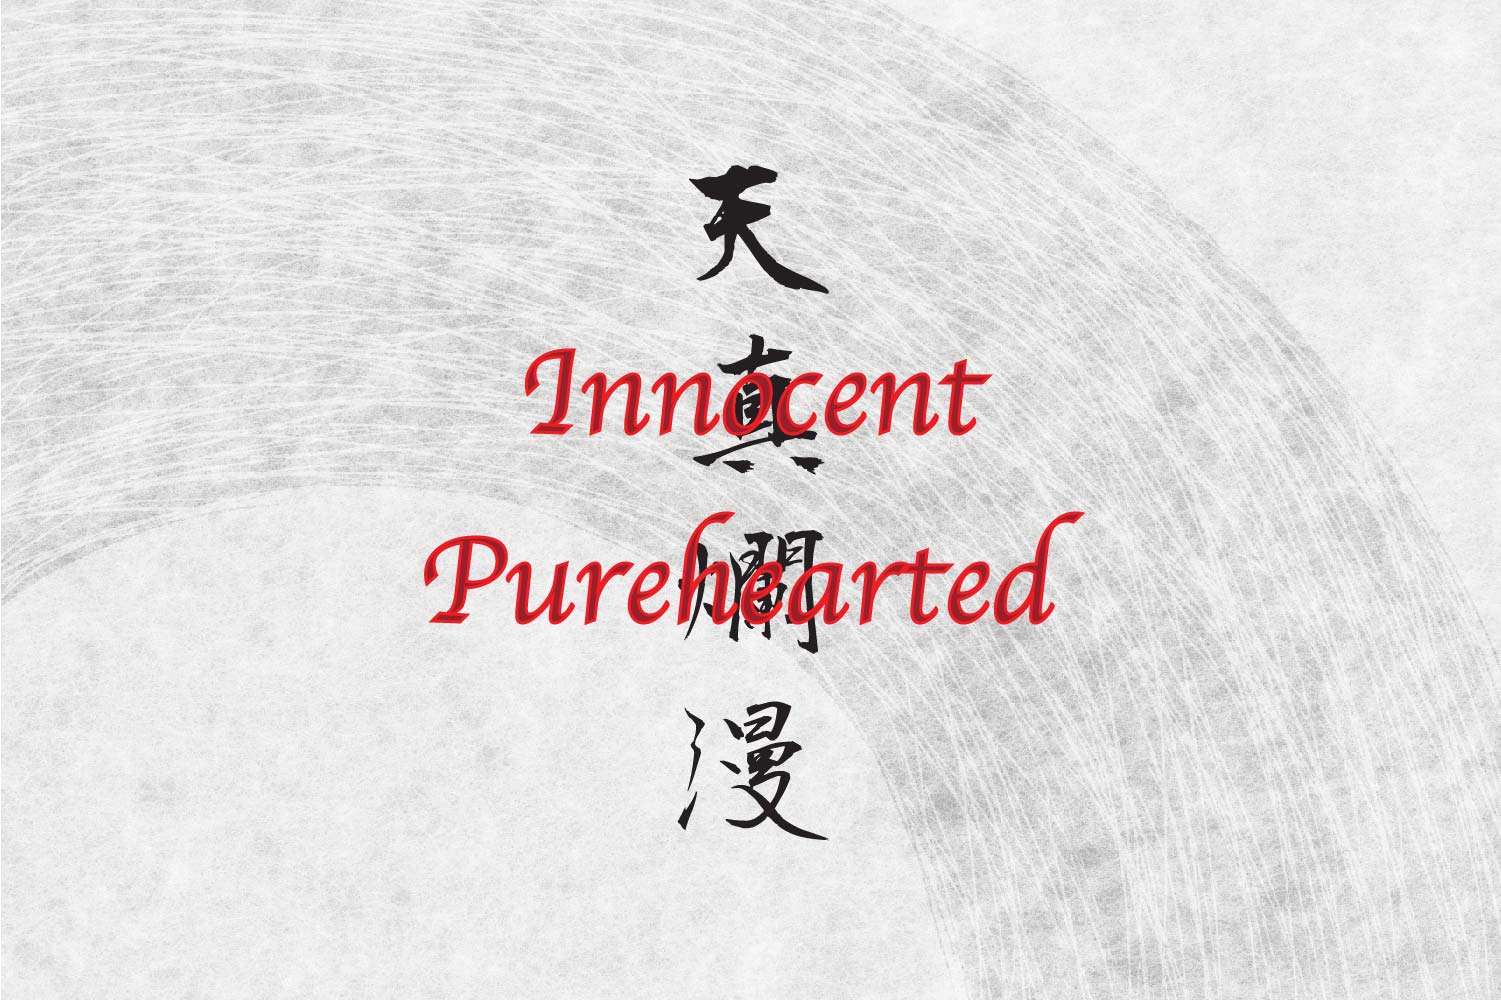 Japanese Letter Tattoo Idea Innocent and purehearted